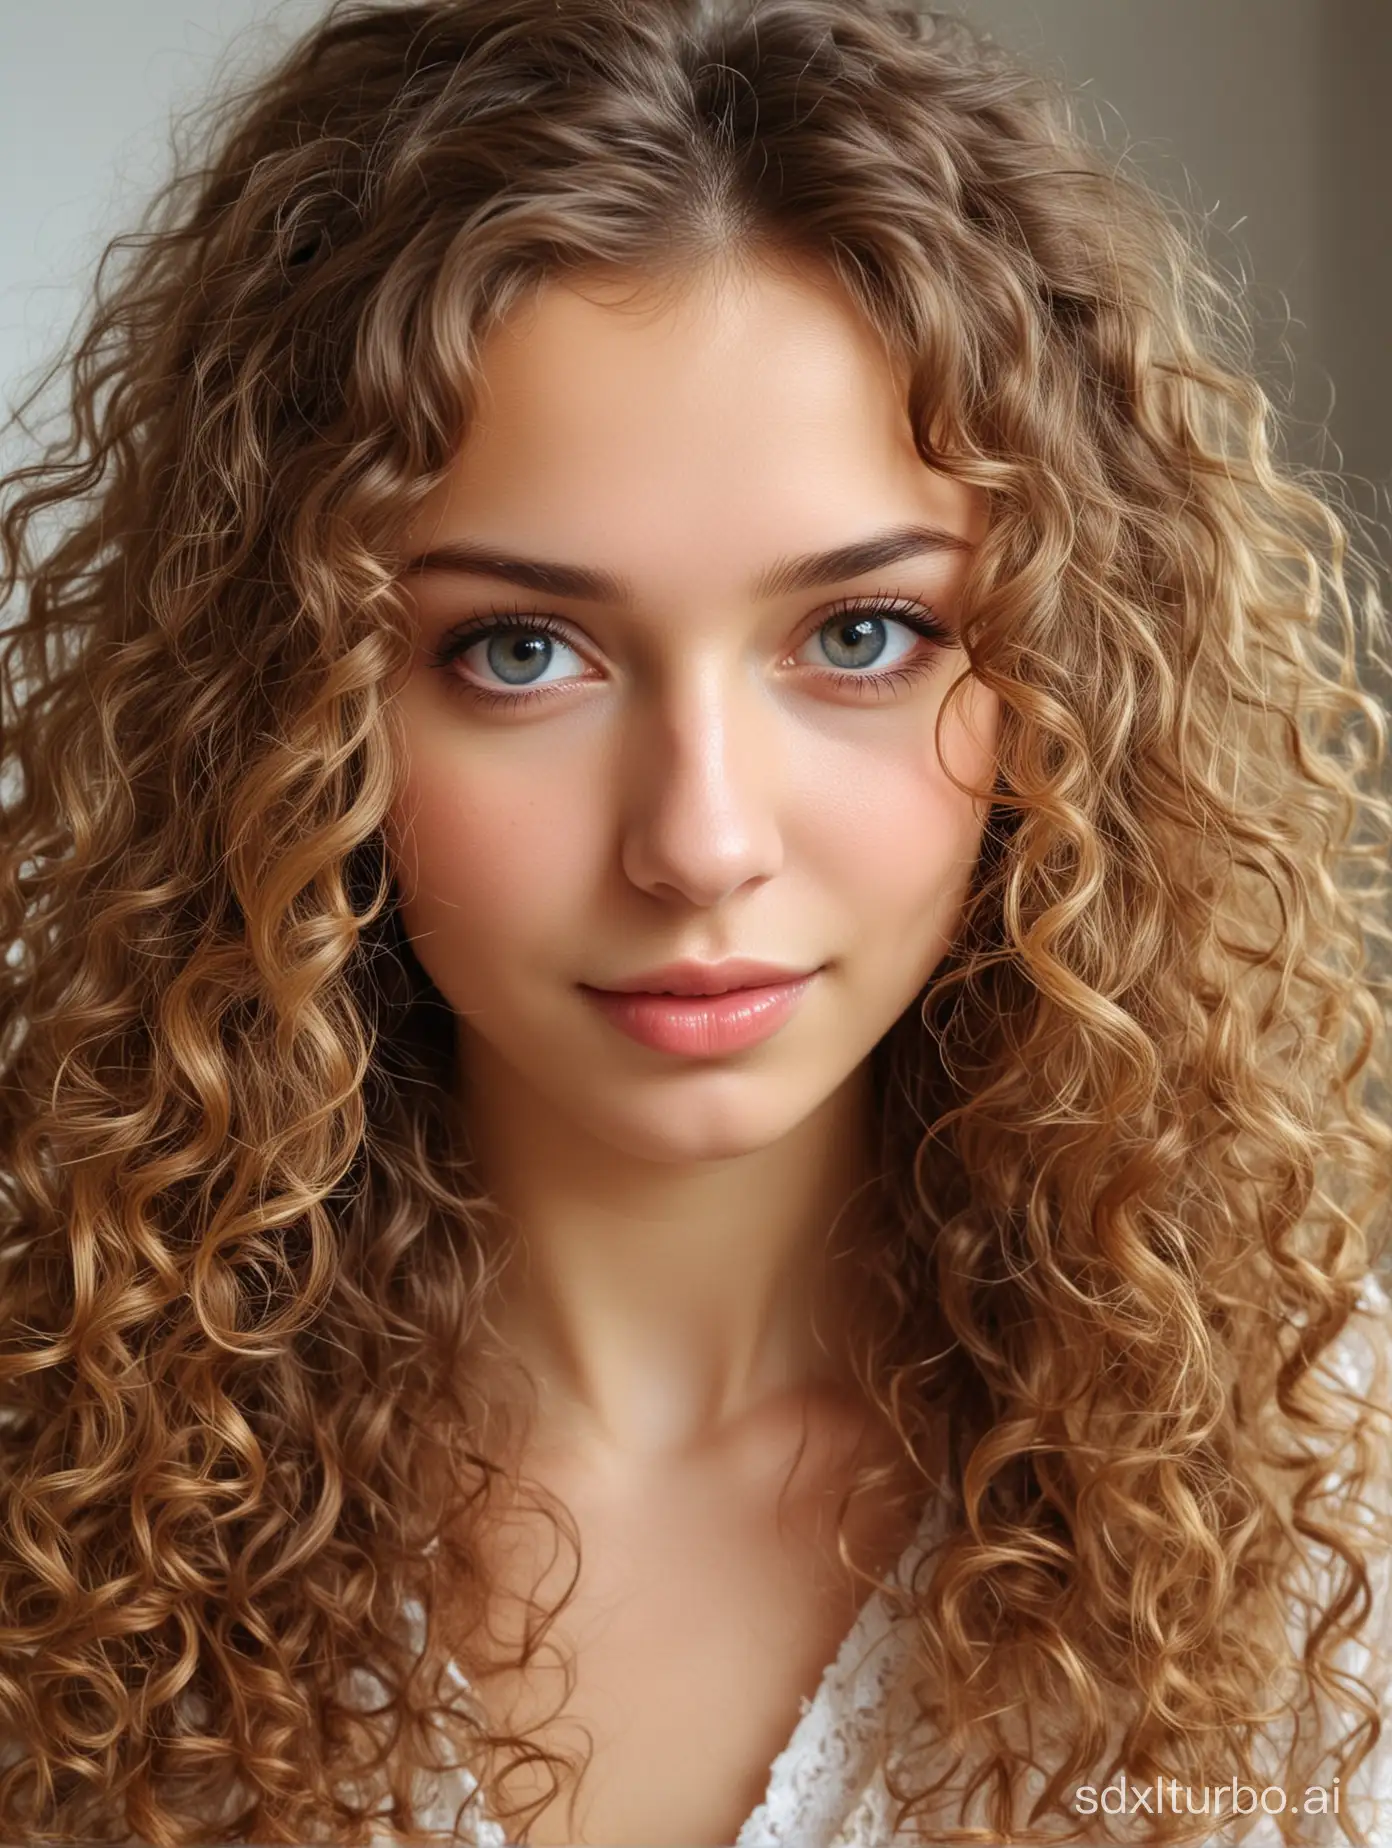 Young Russian girl, perfect face, shy and dignified, very shy, very arousing!!!! The cutest, the cutest face, the most beautiful eyes, super friendly smile, eyes very meticulous, eyes looking at the camera, very meticulous eyes, realistic, enticing looking forward, sexy girl, young, sexy, elegant, long curly hair